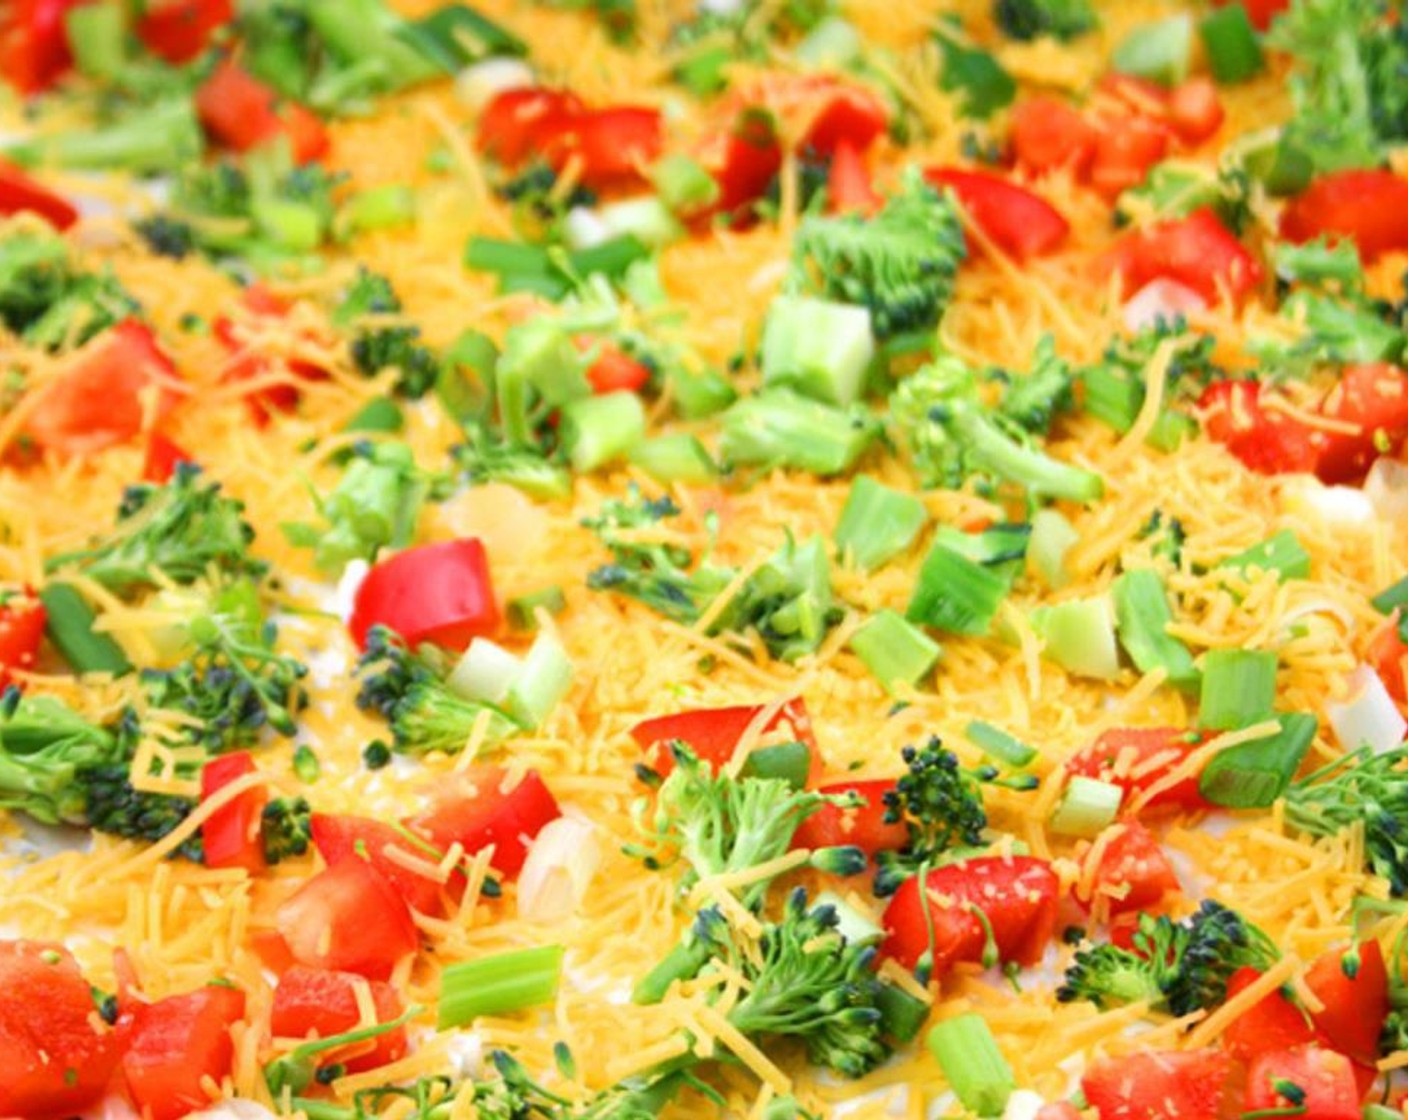 step 5 Top with Broccoli (1 cup), Red Bell Pepper (1 cup), Scallion (1 bunch), and Cheddar Cheese (1 1/2 cups).